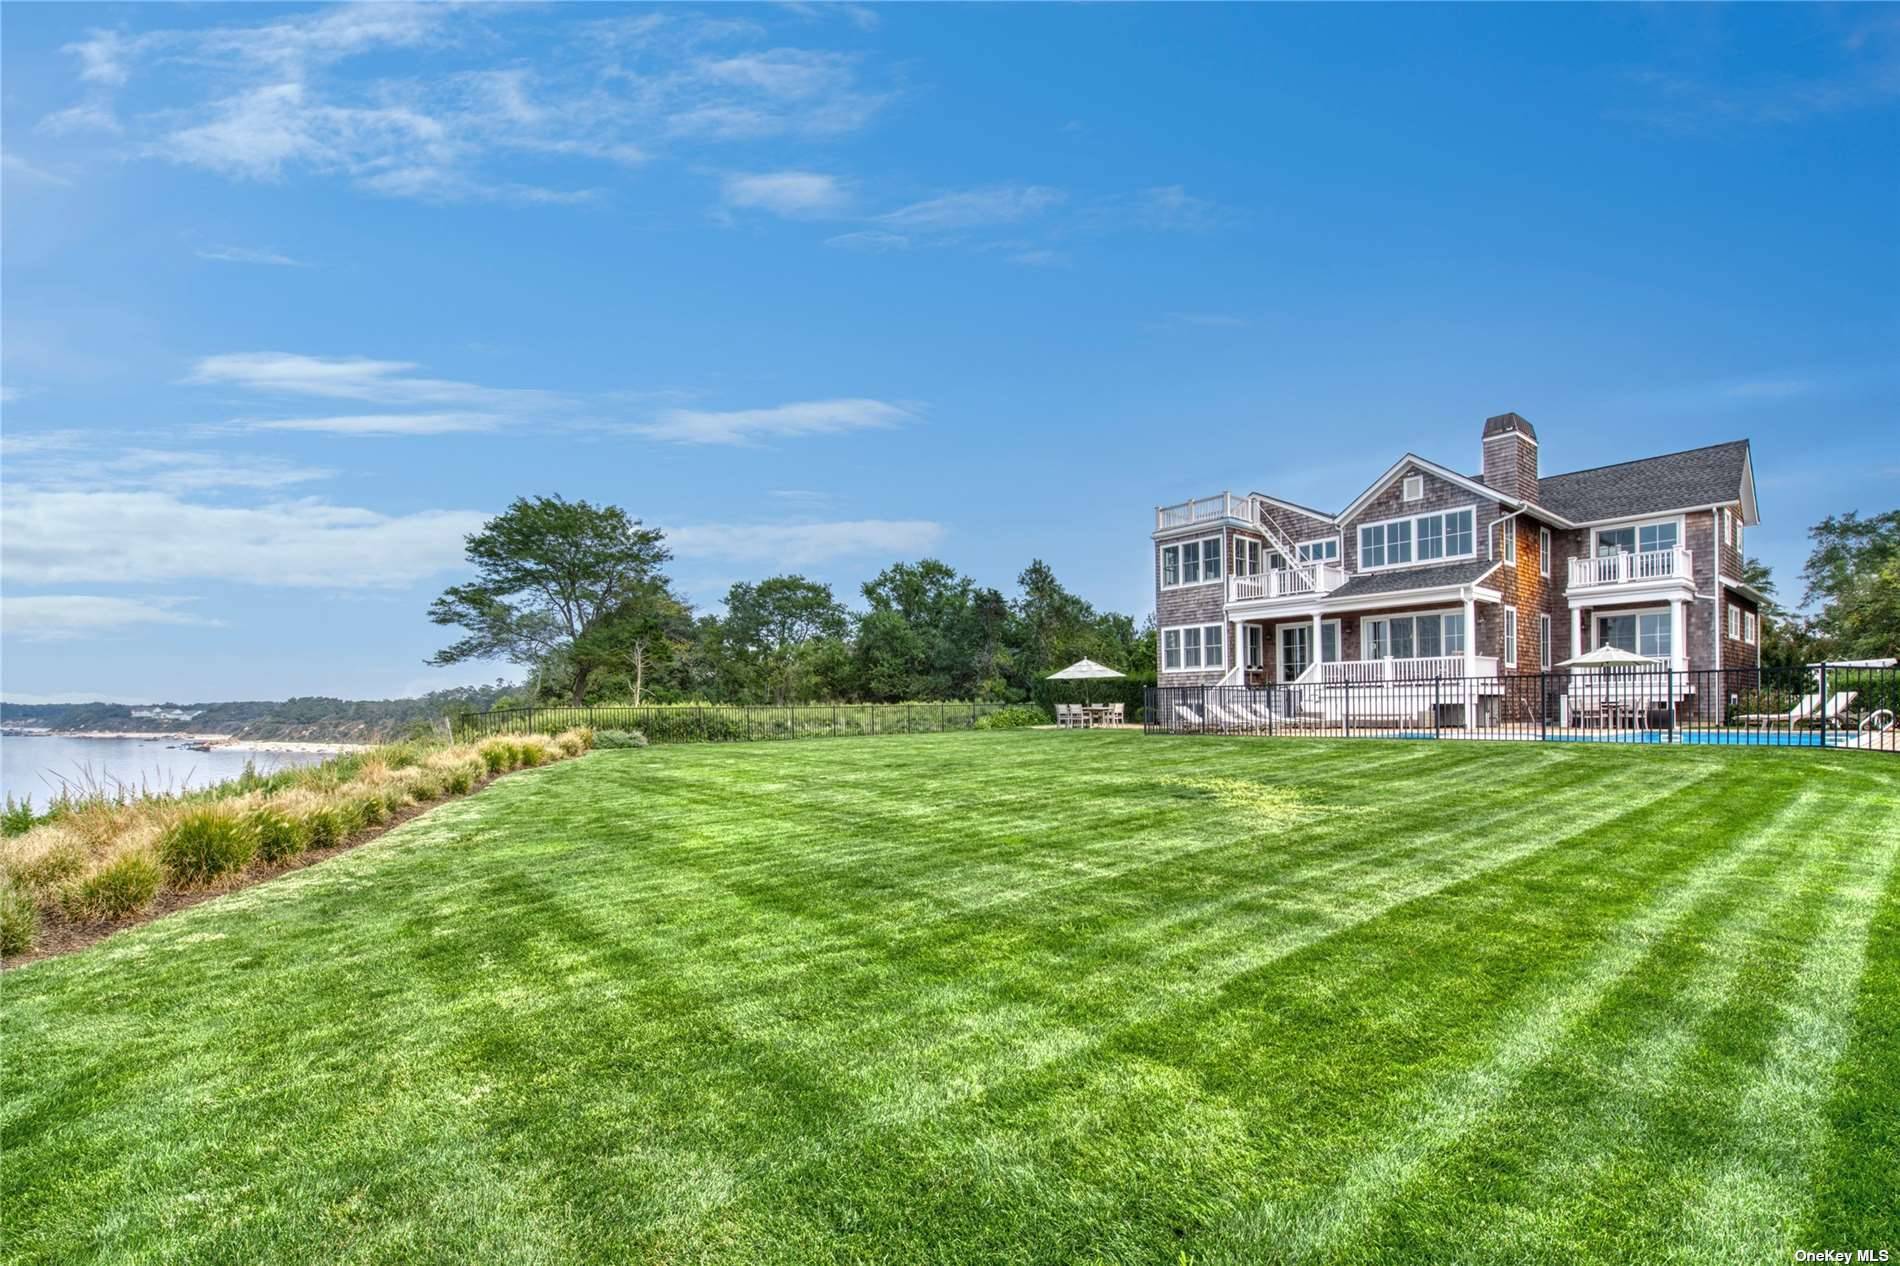 Immaculate shingle style home perched above long island sound.